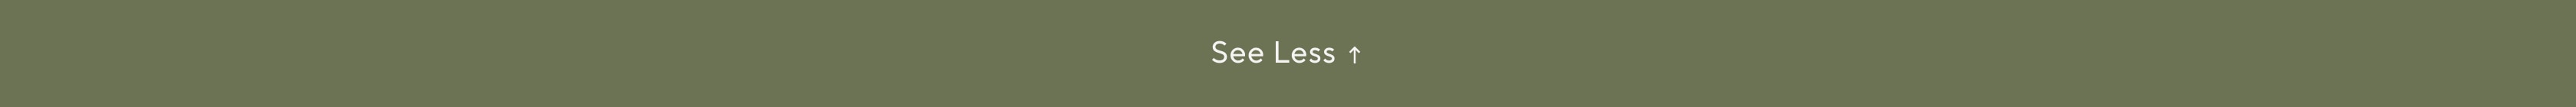 See Less